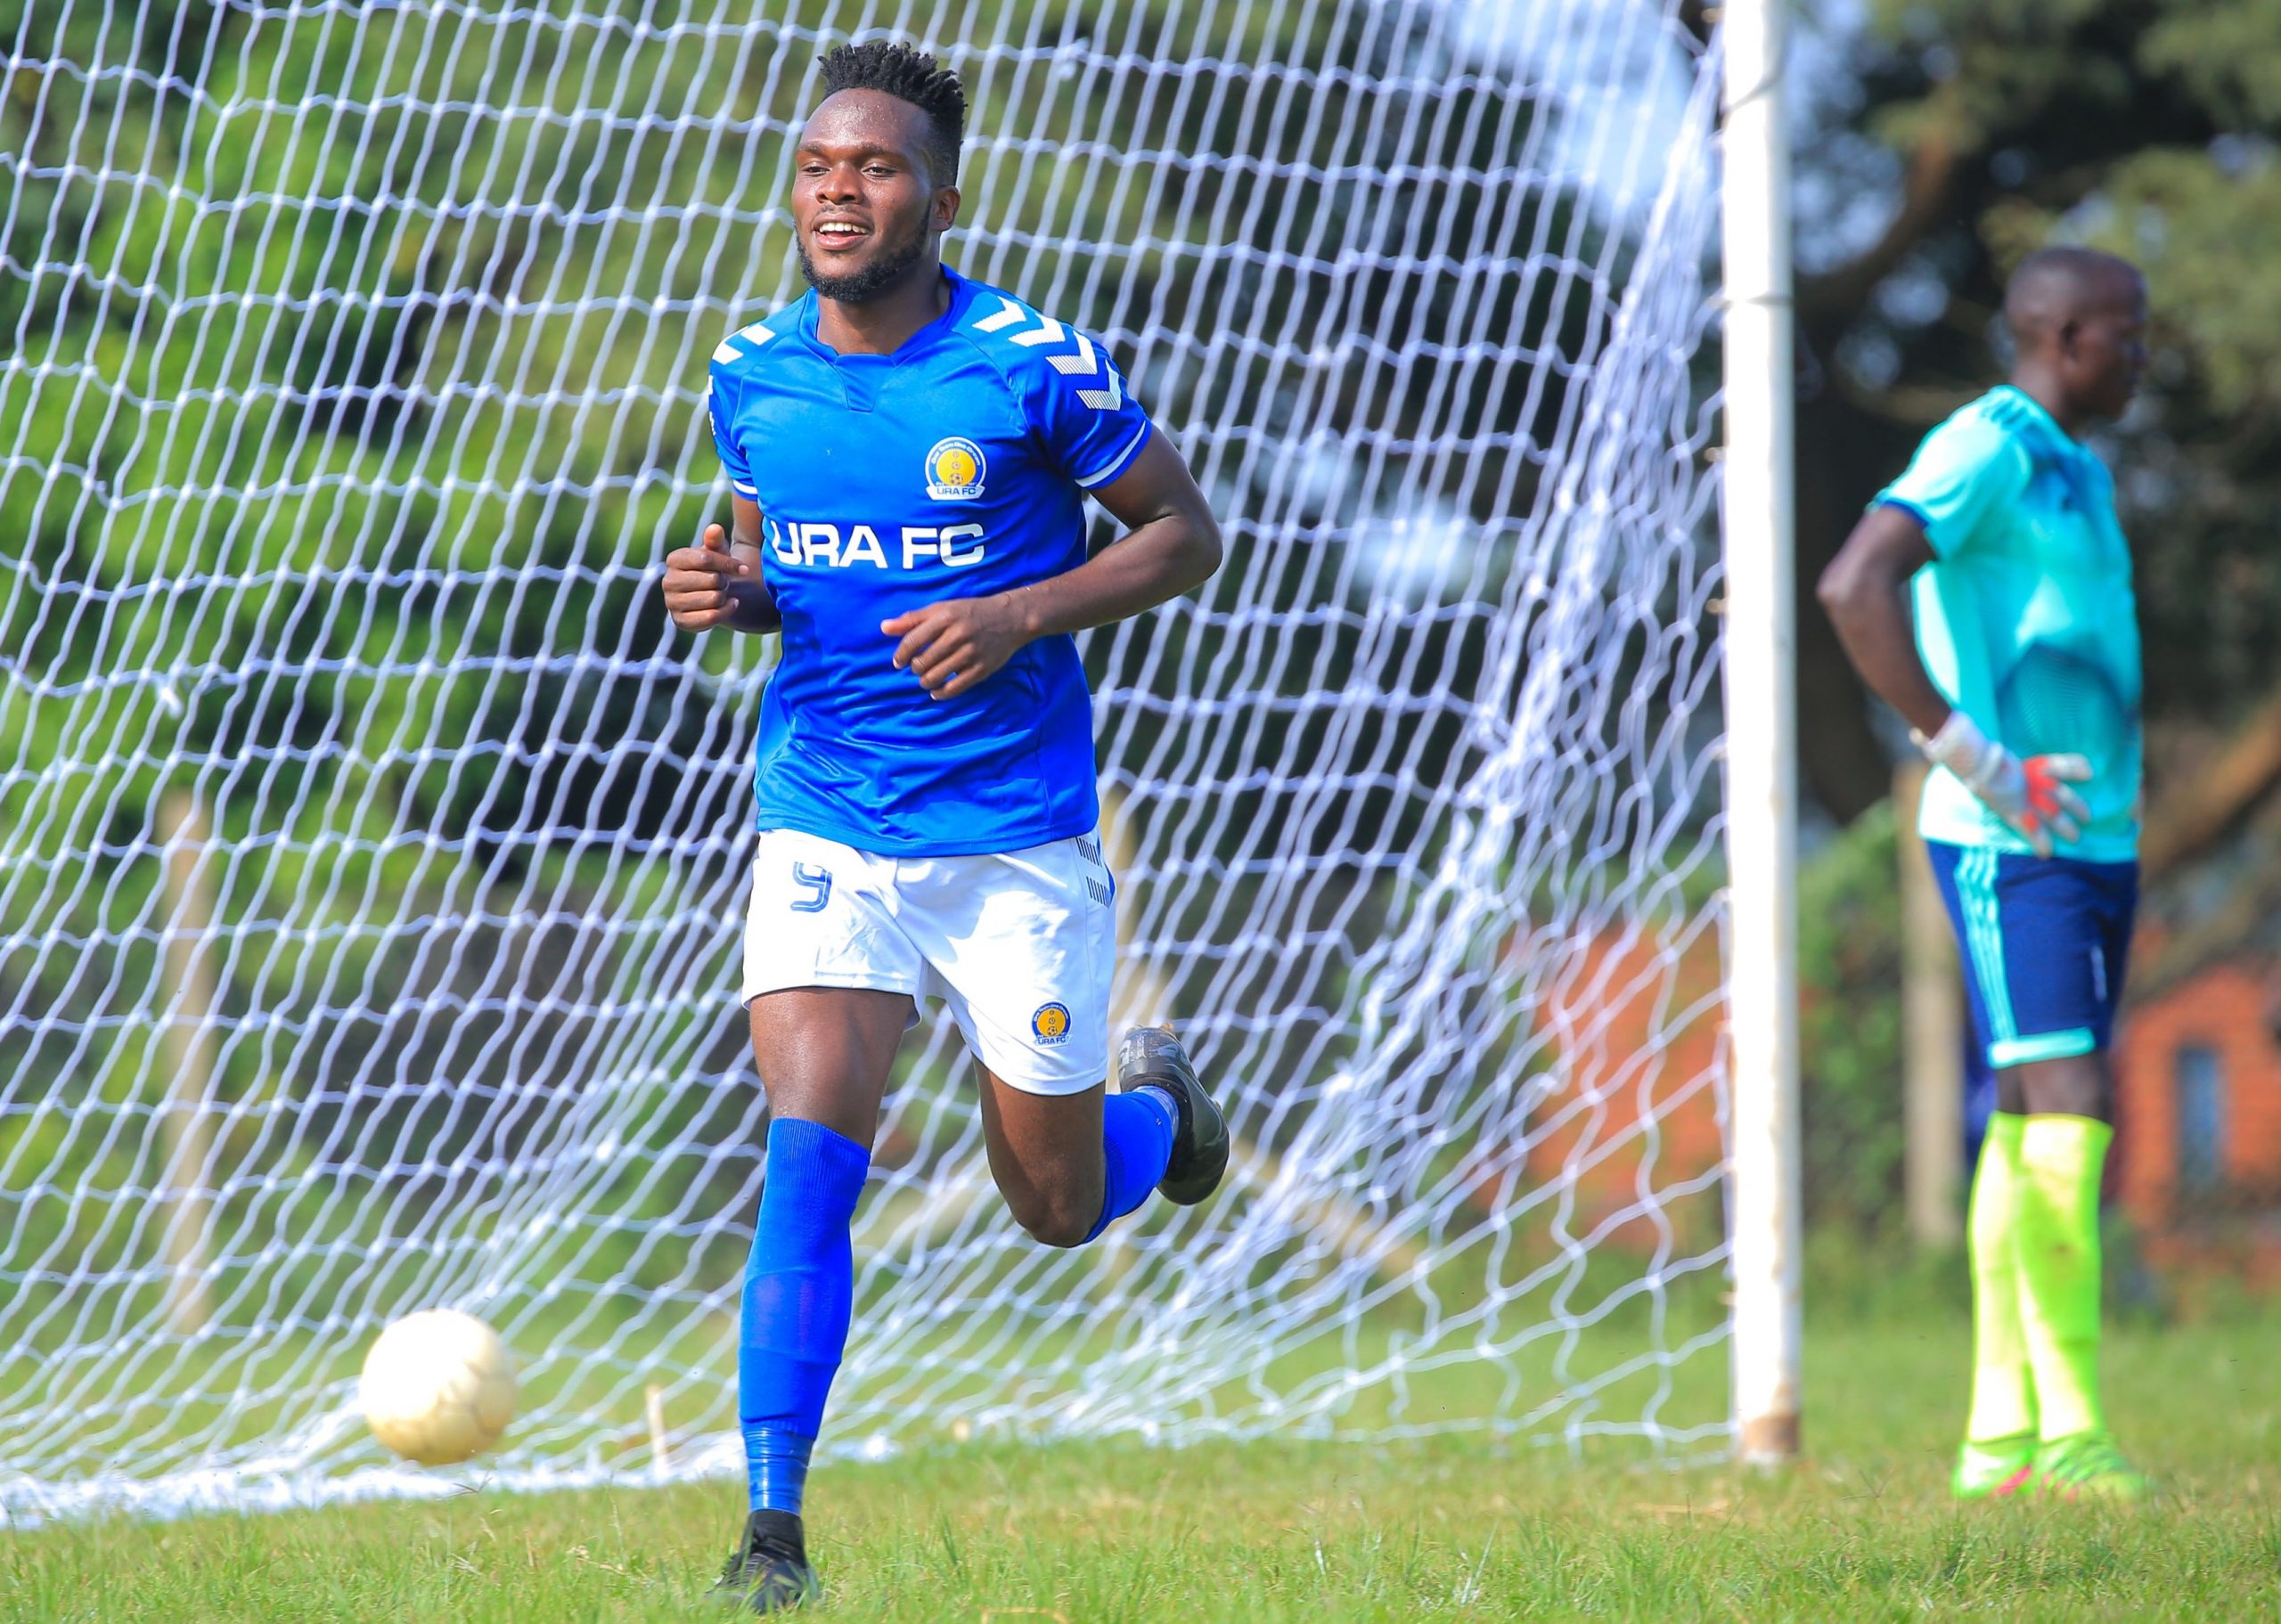 URA finish first round of UPL as table leaders